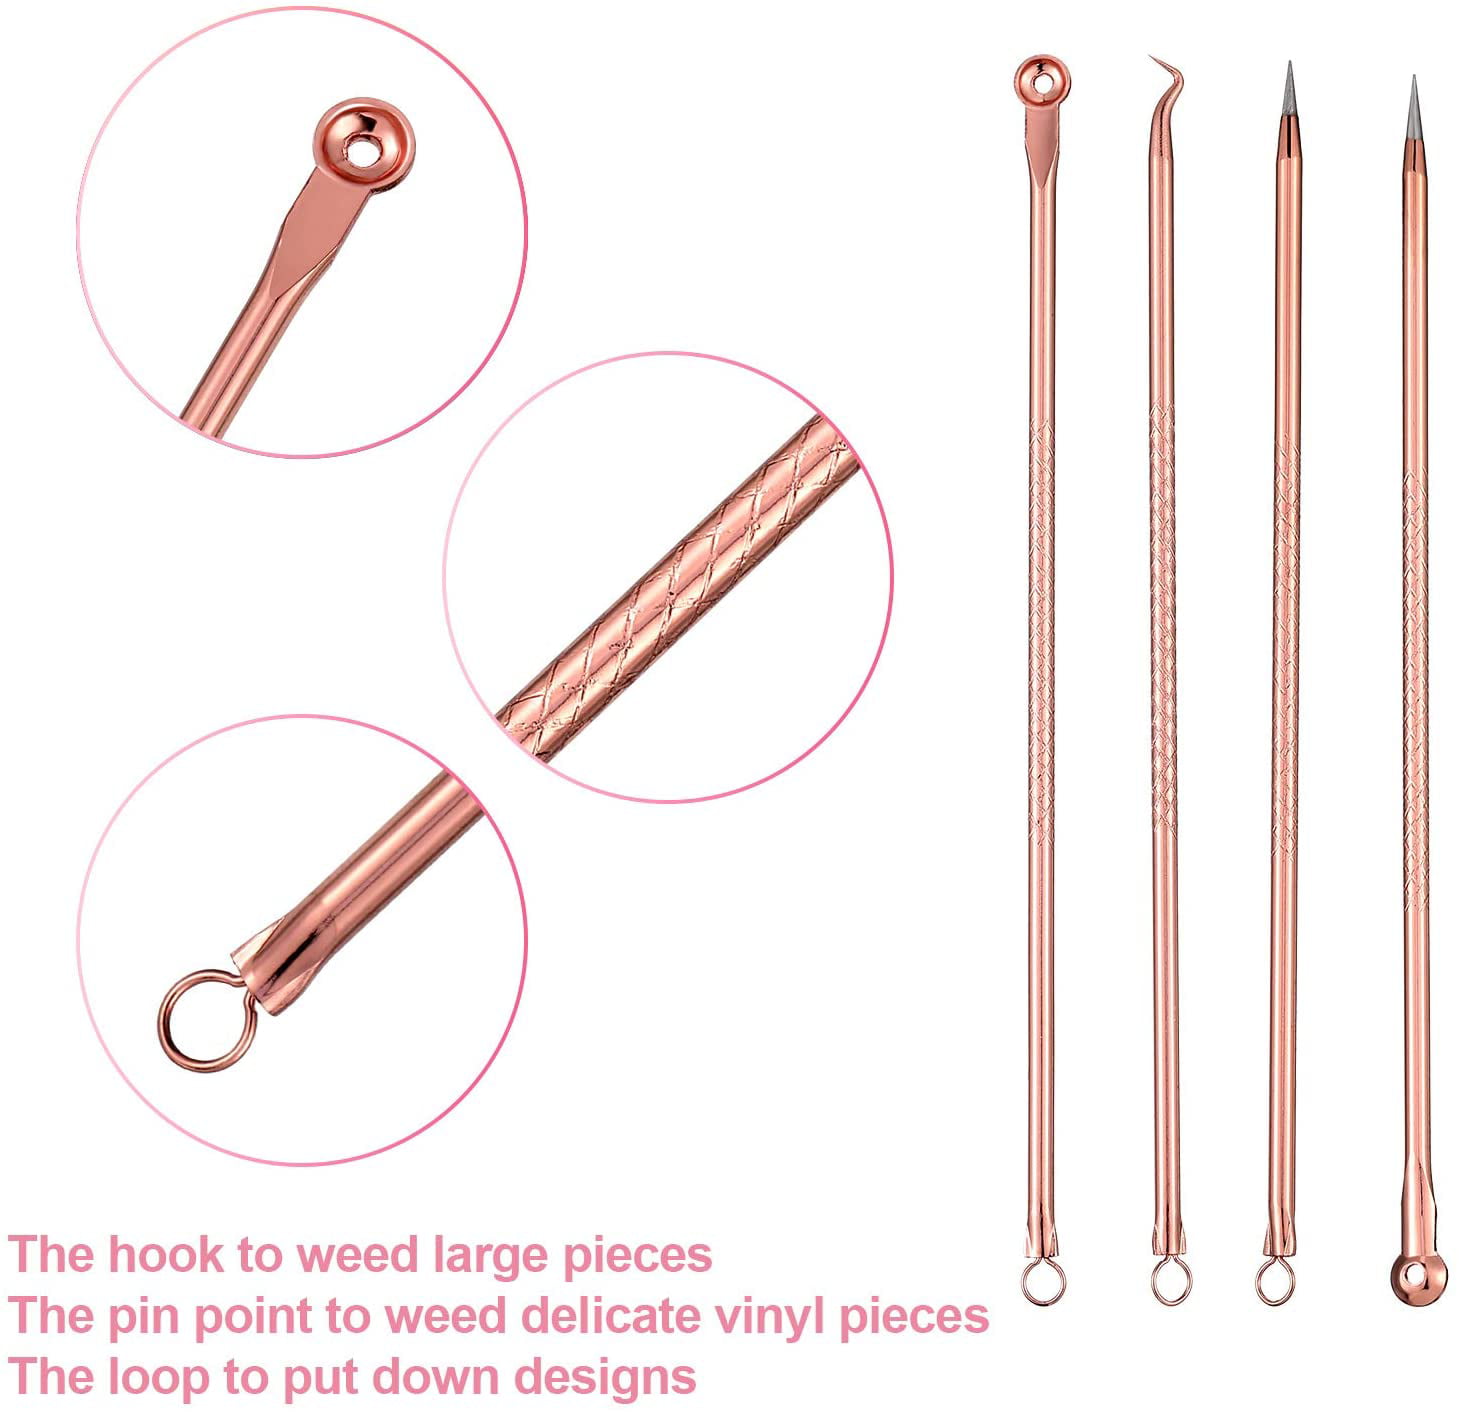 7 Pieces Craft Vinyl Weeding Tool Stainless Steel Whitehead Blackhead Removal Needles Tweezers Precision Vinyl Weeding Tool with PU Leather Case for Adhesive Vinyl Sticker Rose Gold 